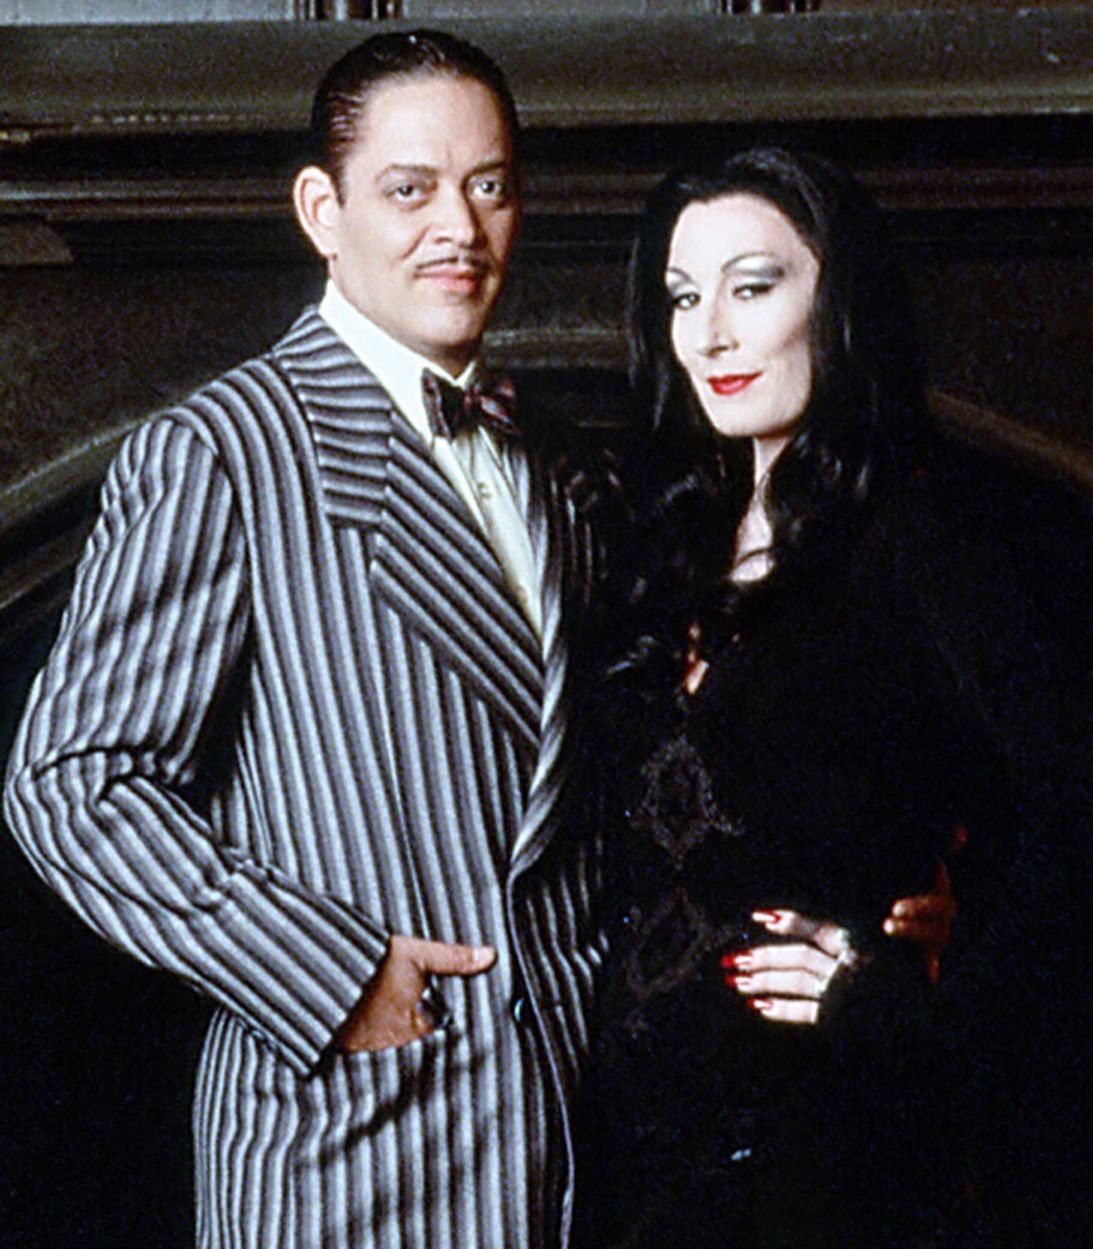 The Addams Family 1991 vertical